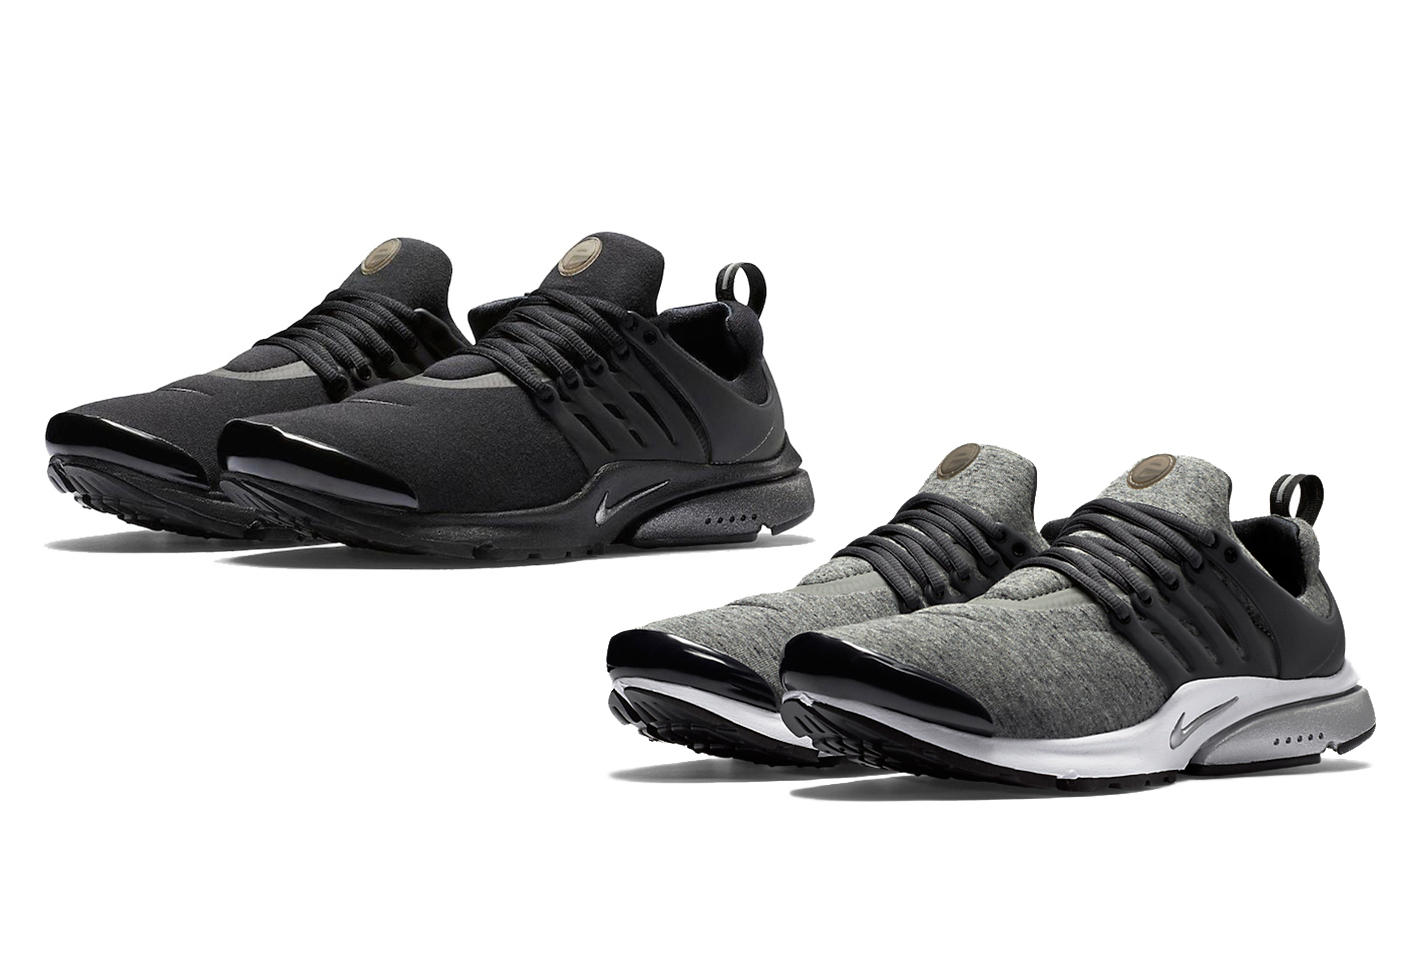 Nike Air Presto 'Tech Pack' Comes with 